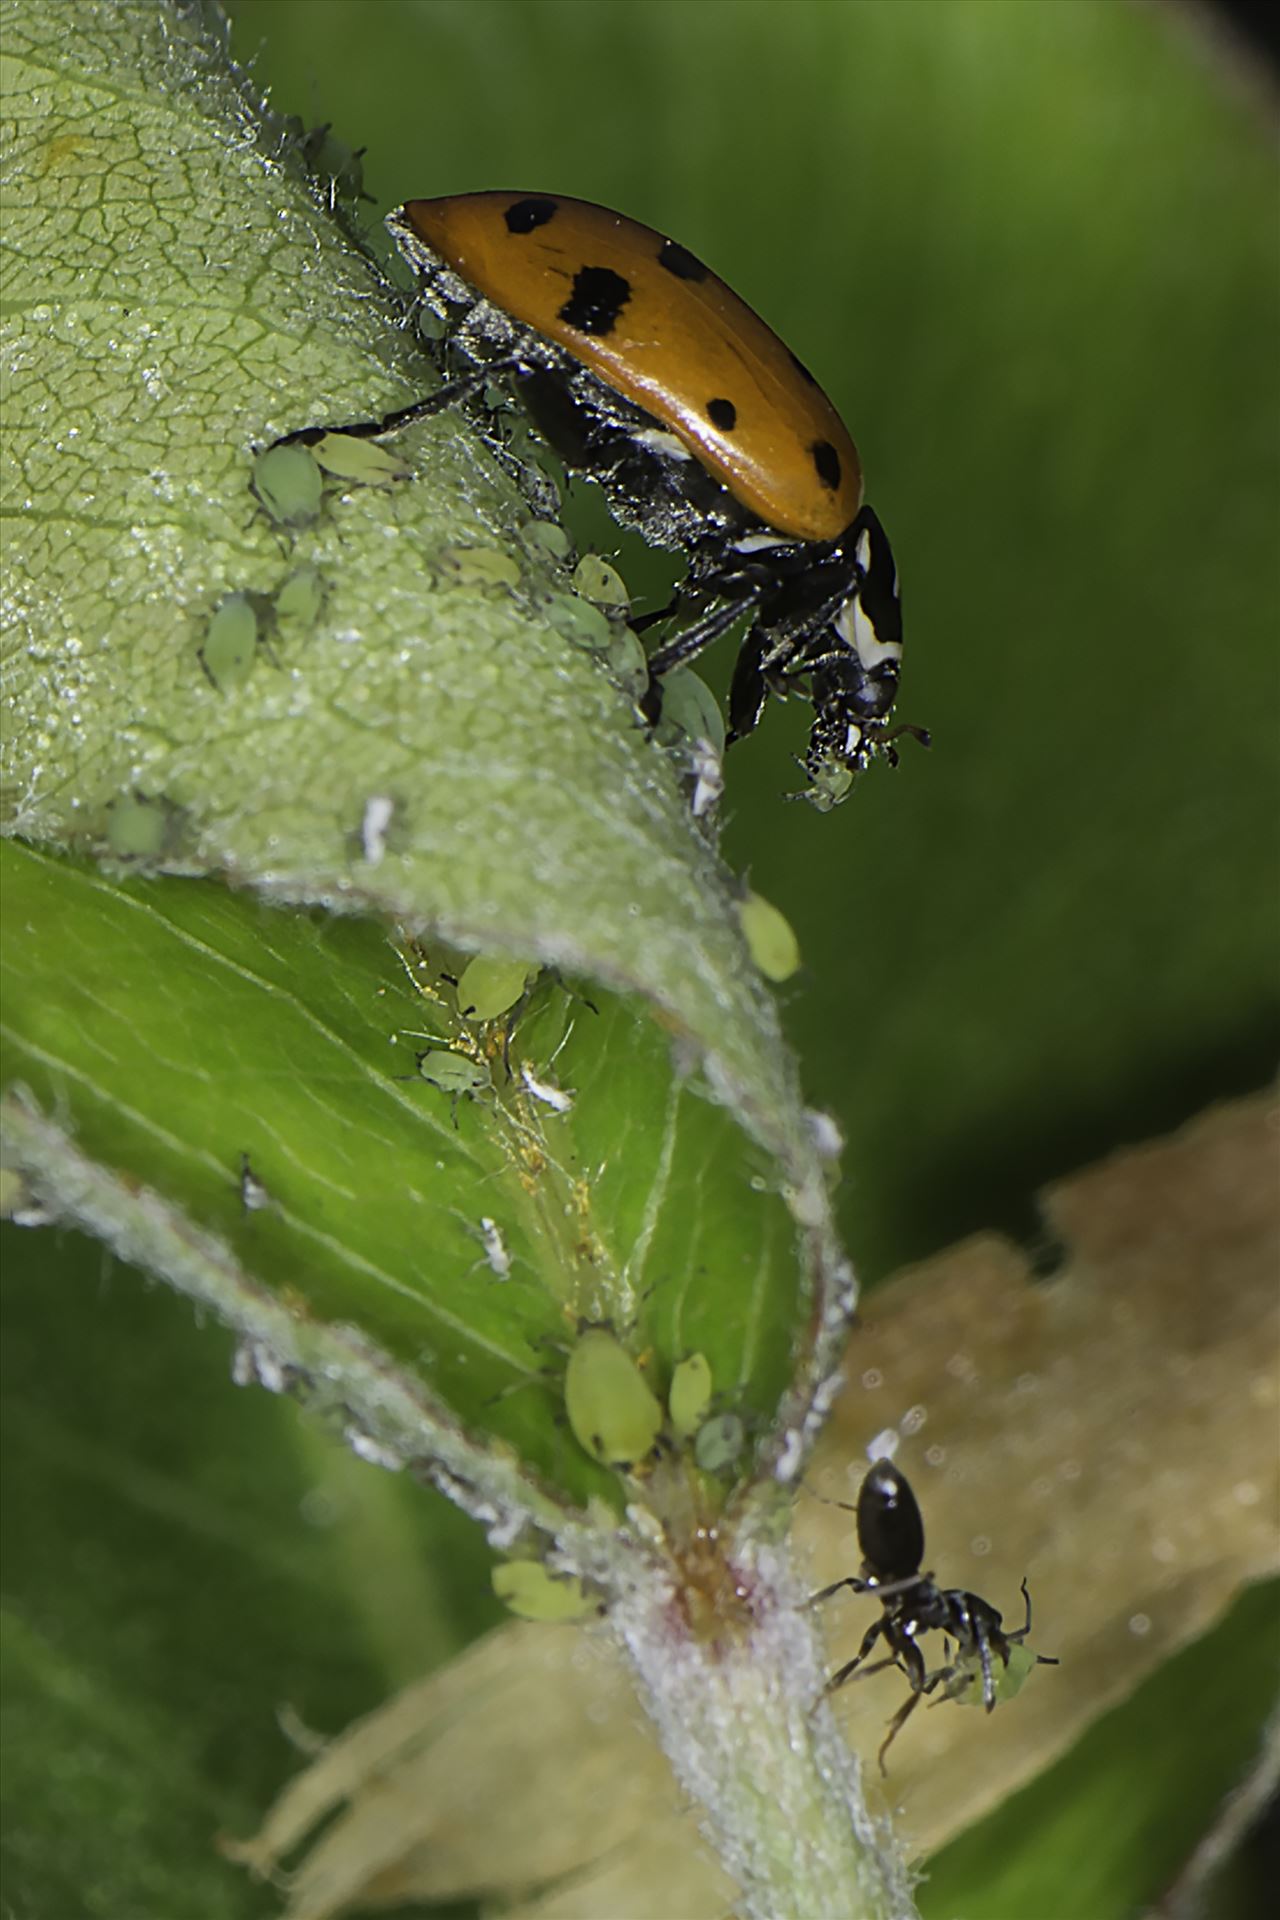 Drama in the Garden Ladybug eats aphid while ant protects other aphids by Denise Buckley Crawford